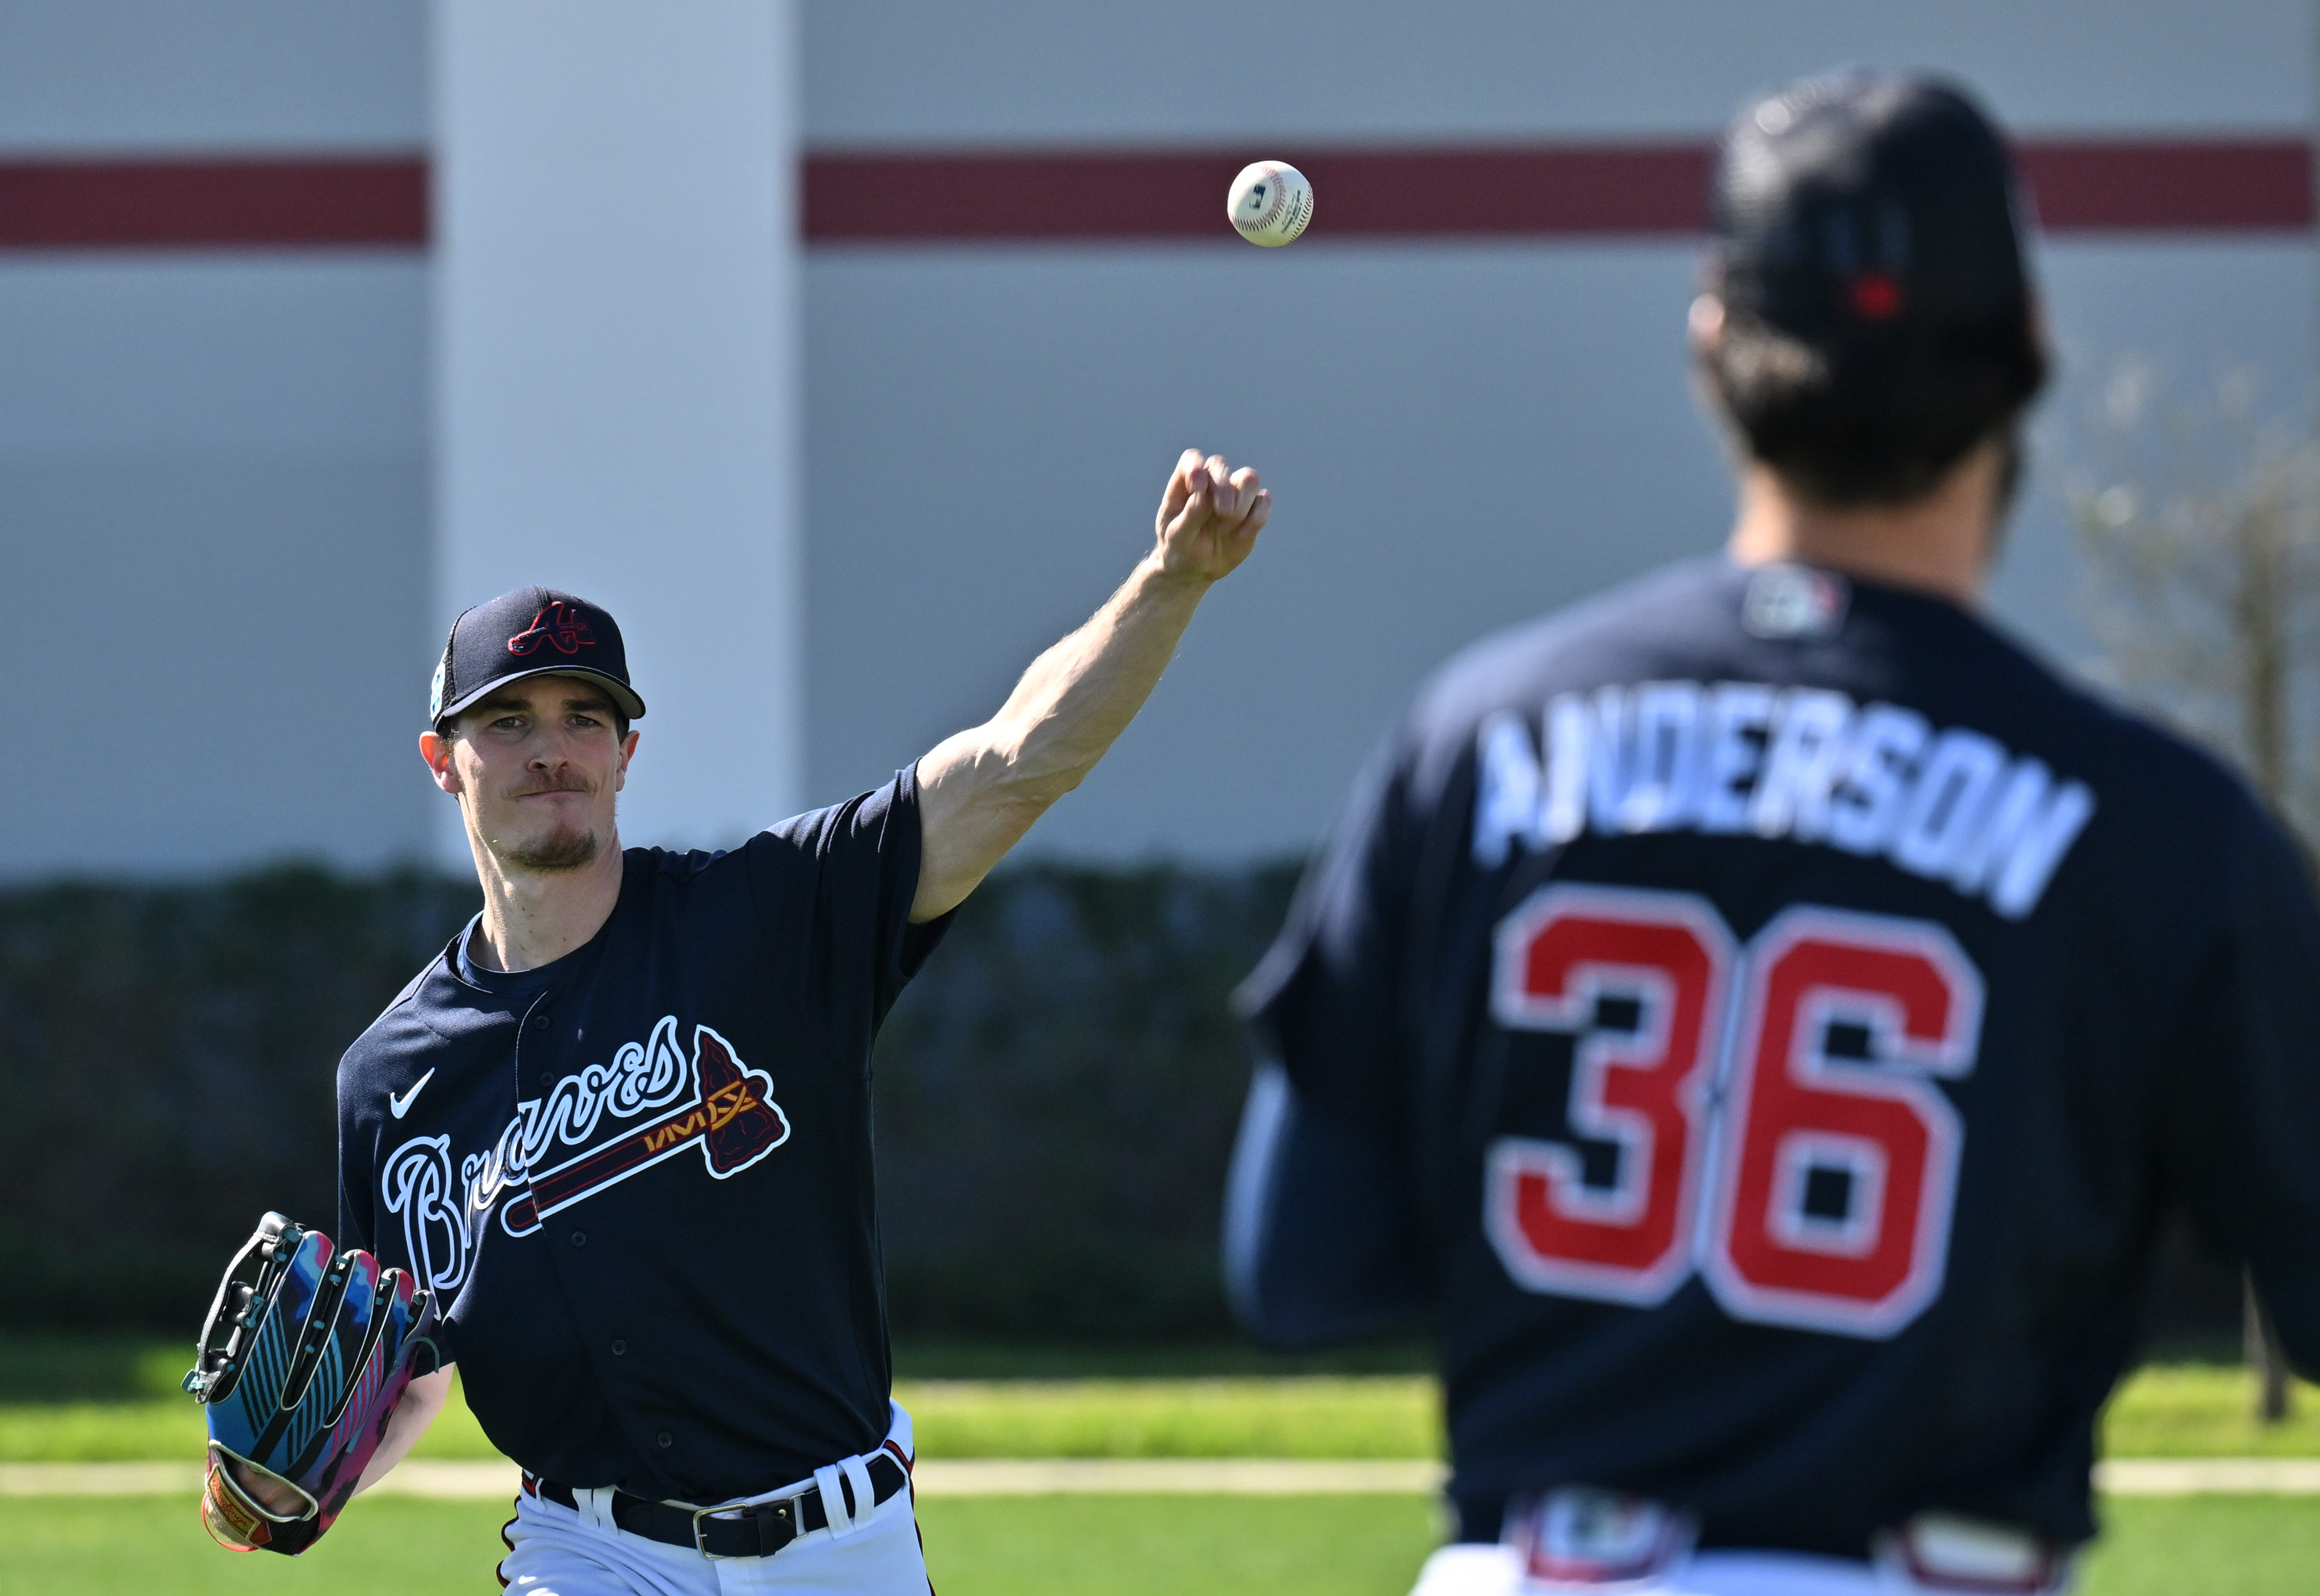 Max Fried says he's not angry over arbitration, is open to